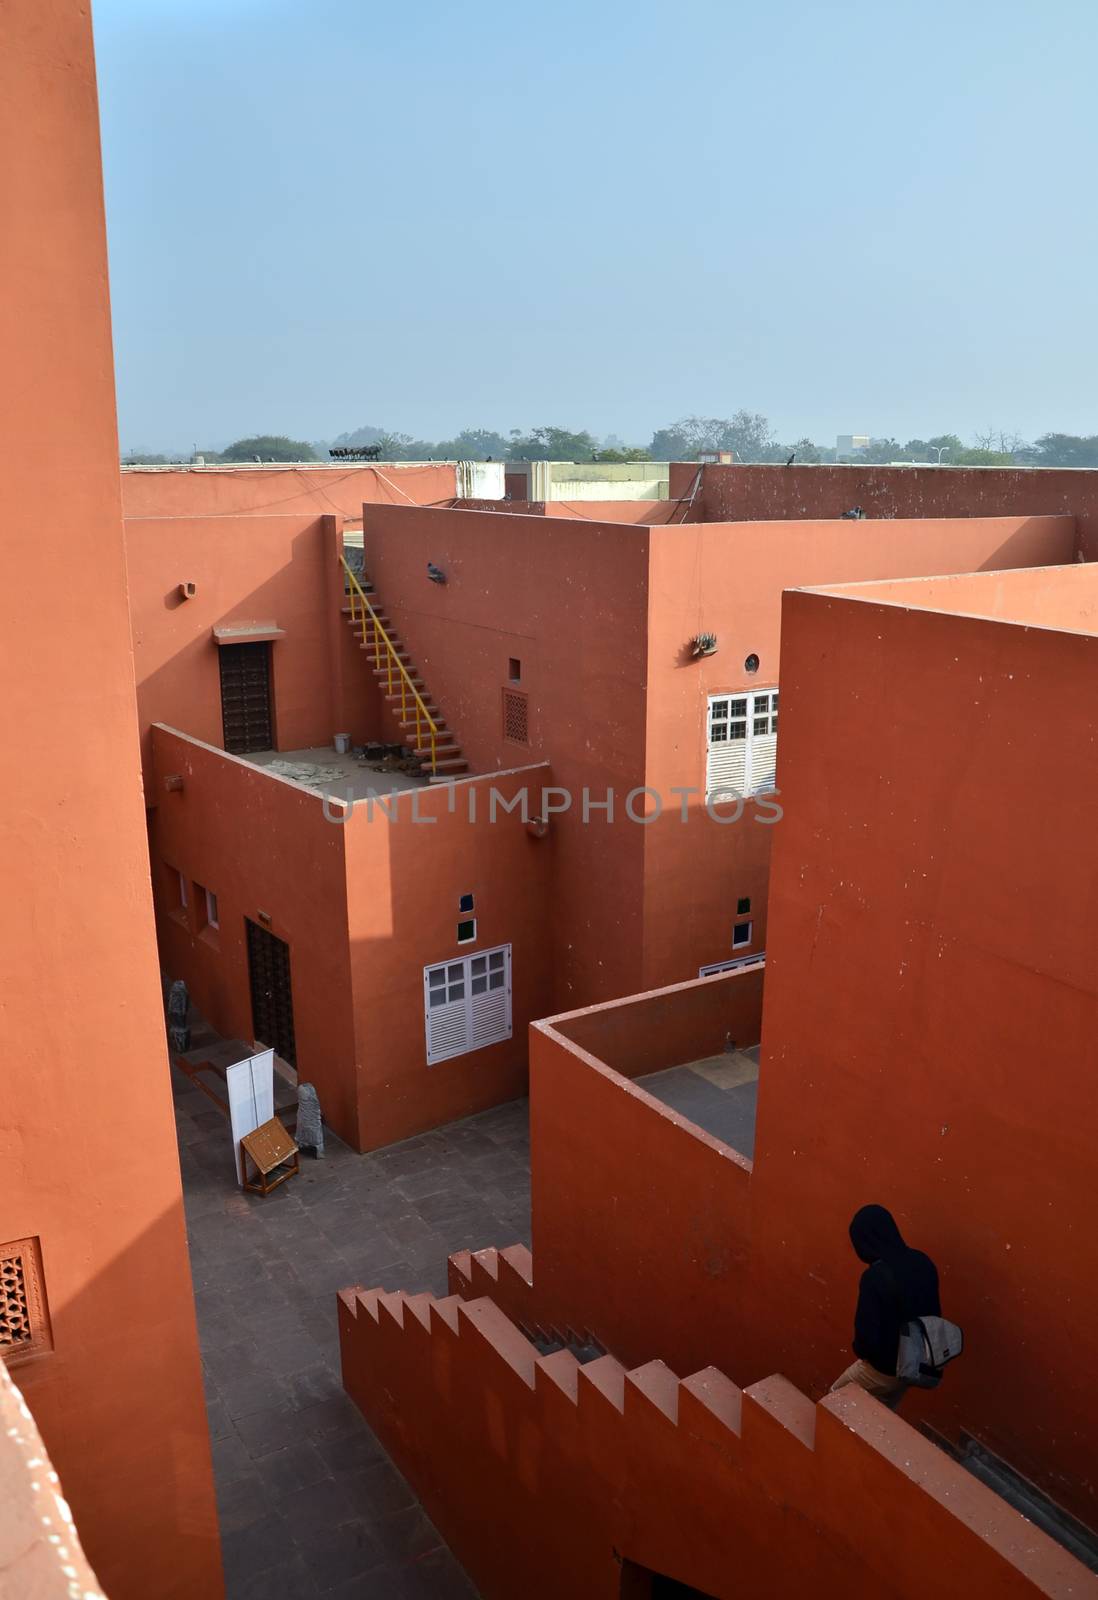 Jaipur, India - January 31, 2014: People visit Jawahar Kala Kendra on January 31, 2014. Jawahar Kala Kendra (JKK) is a multi arts centre located in Jaipur in India. It was built by Rajasthan government.